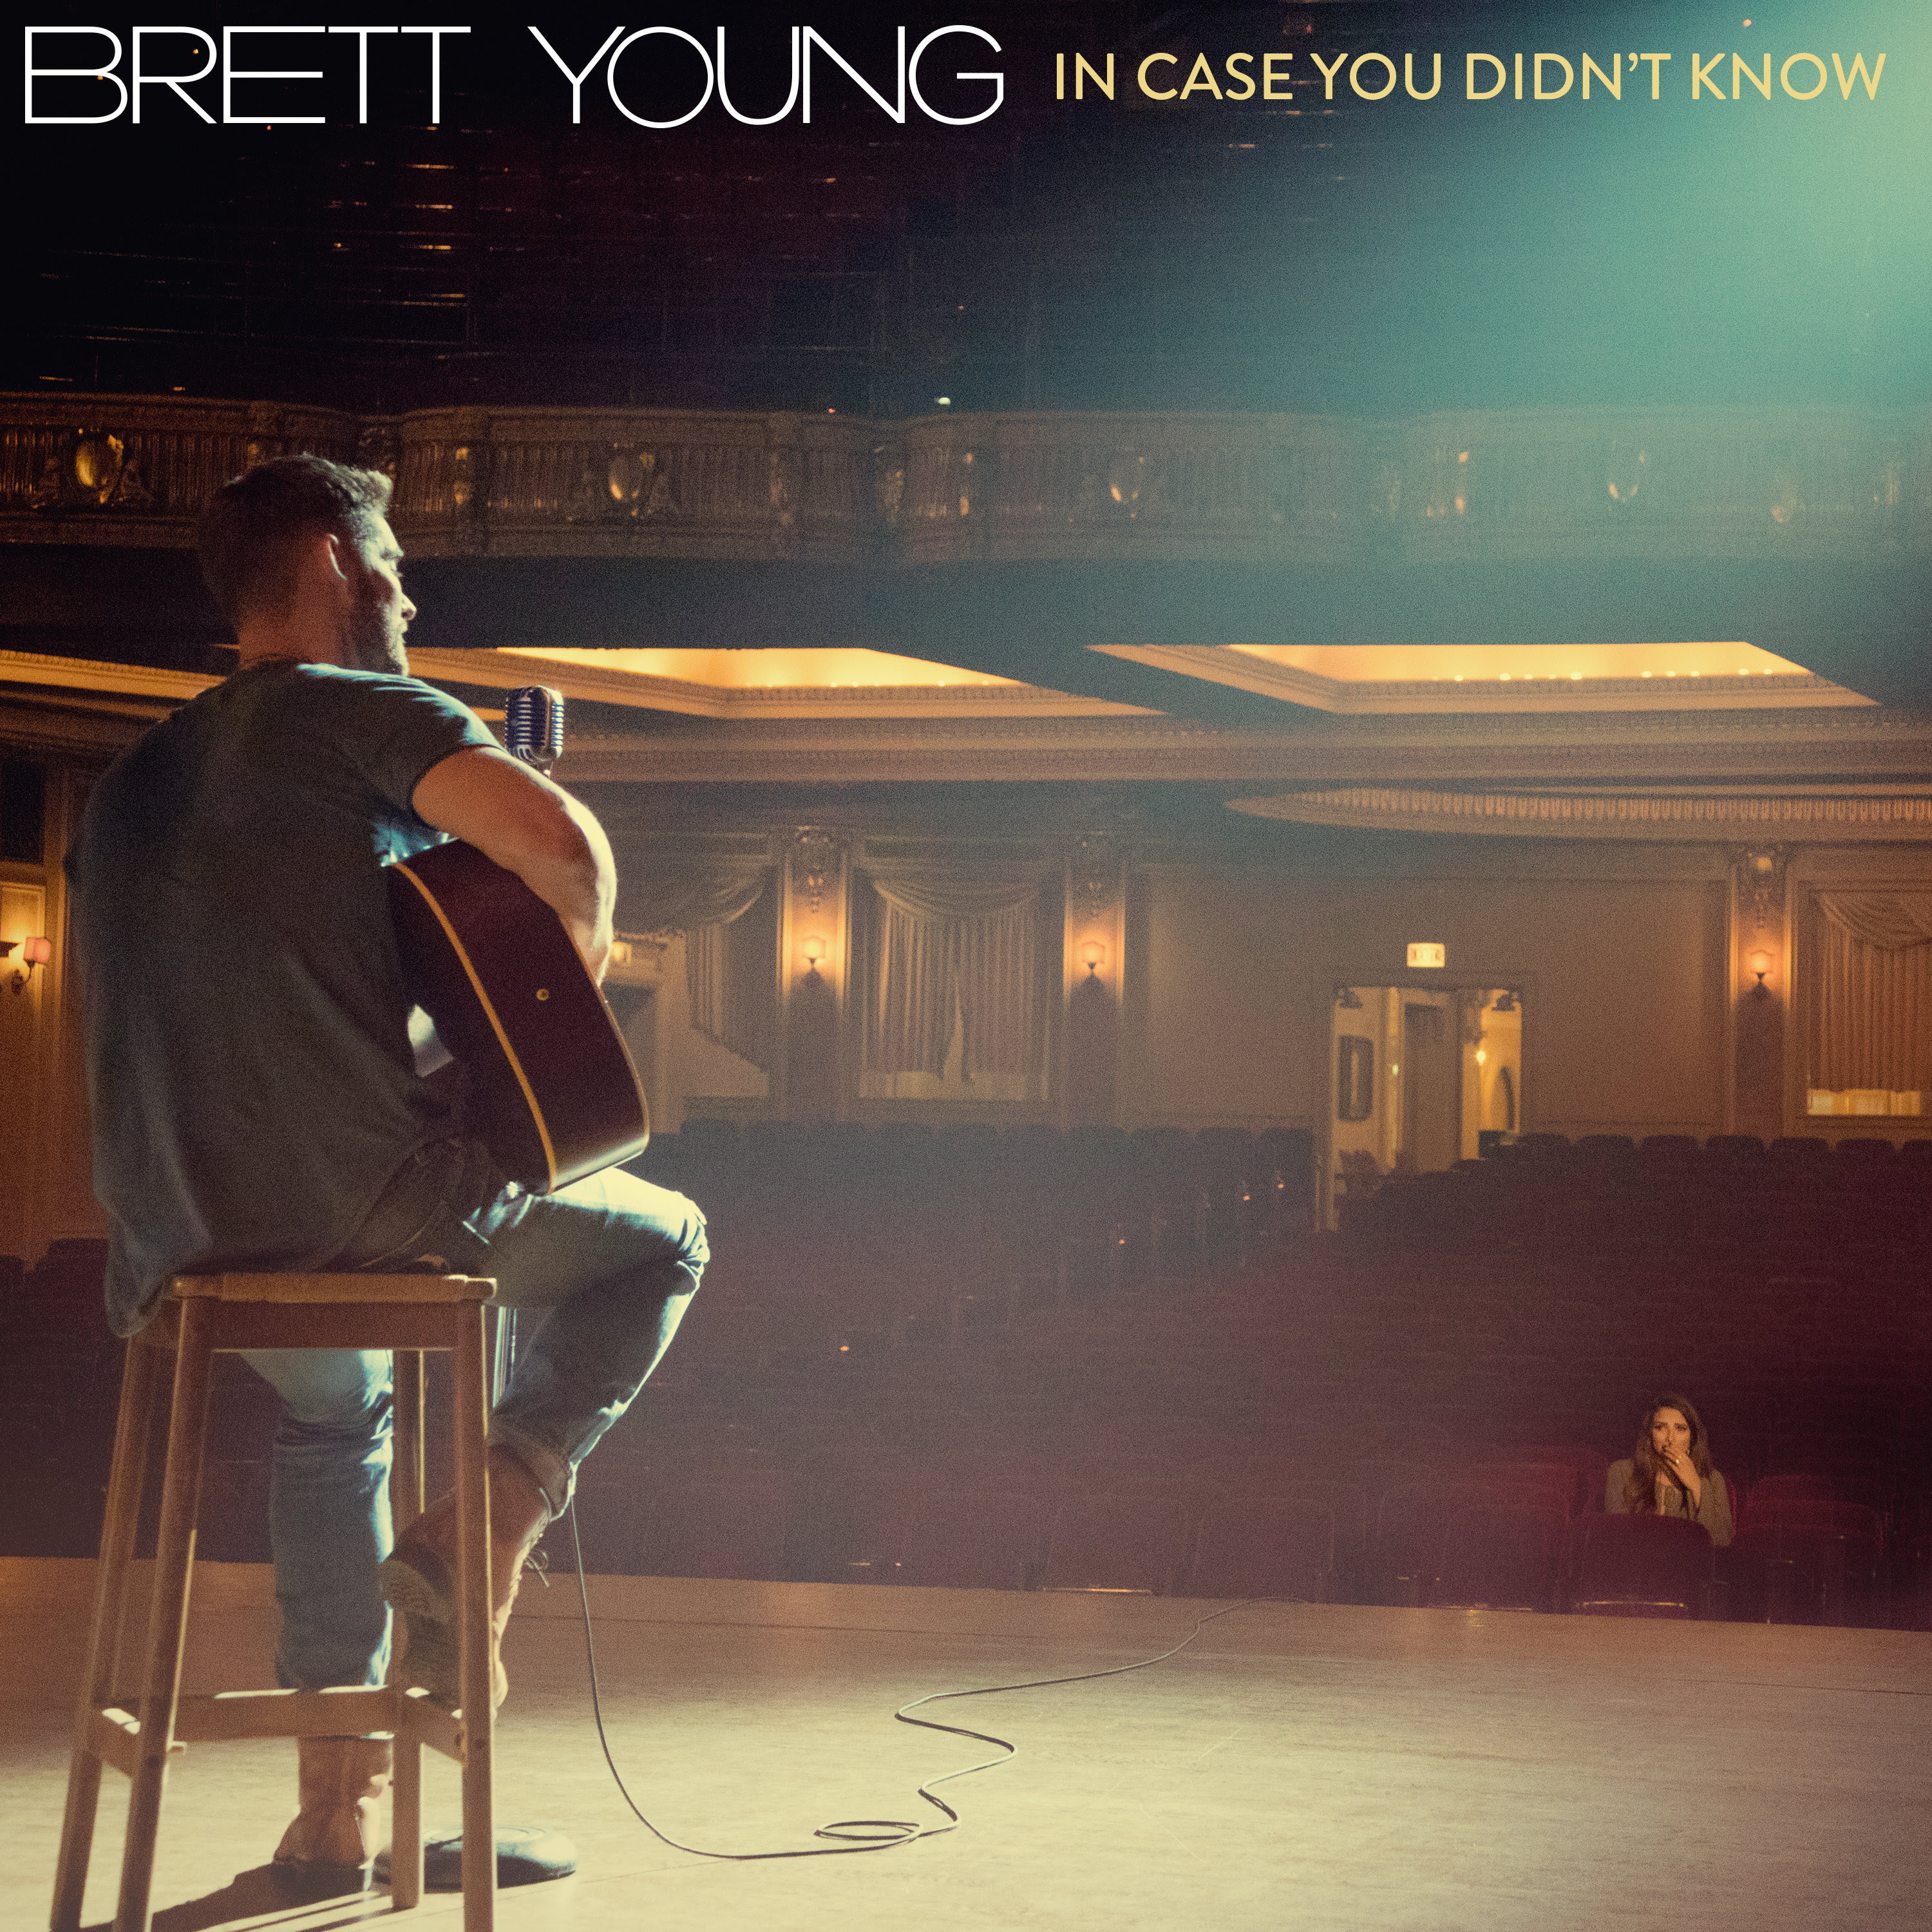 Brett Young’s “Sleep Without You” and “In Case You Didn’t Know” Have Both Gone GOLD!